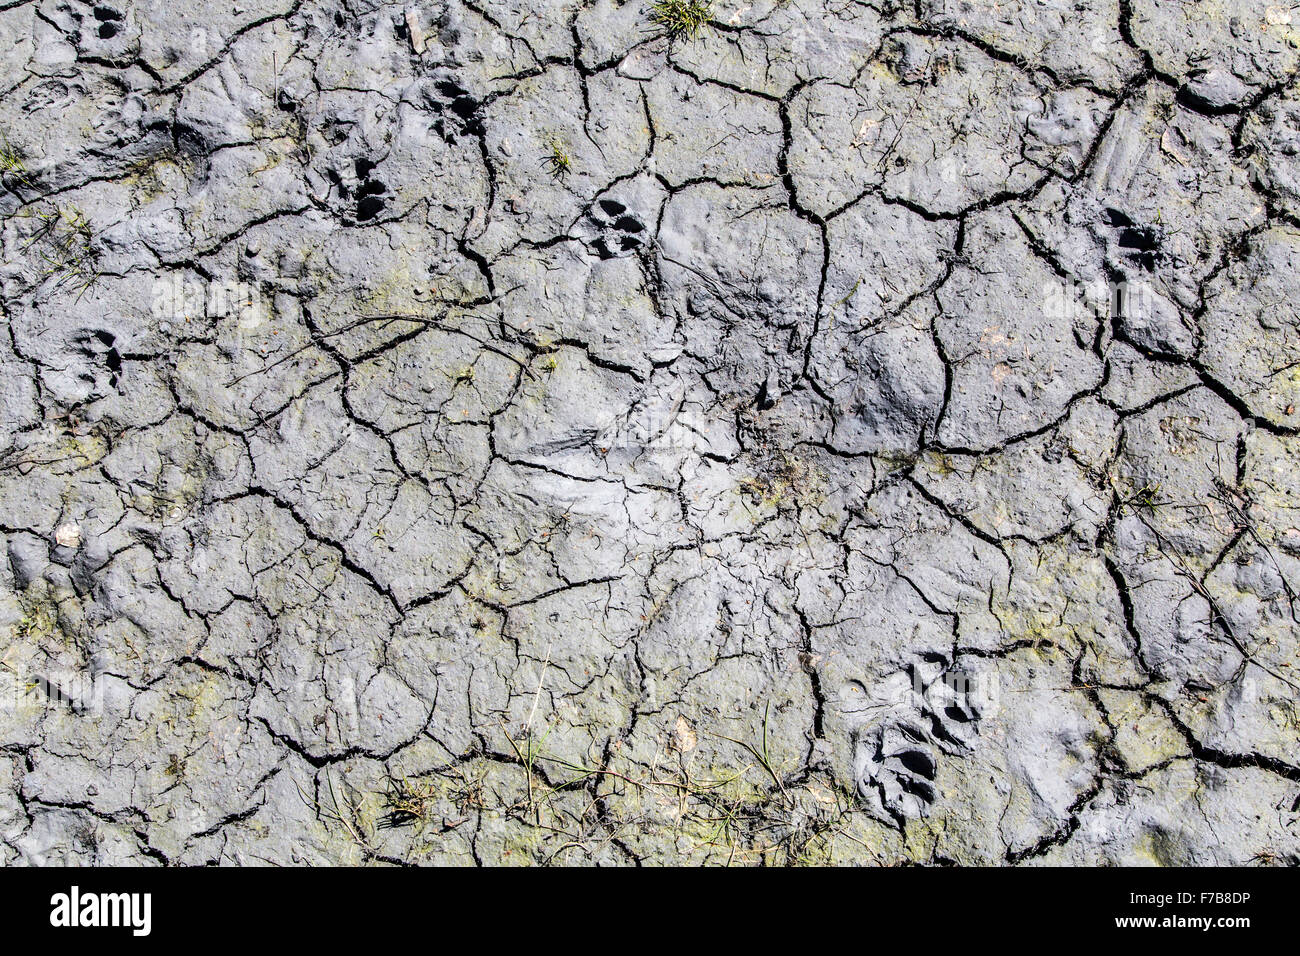 Dry soil with cracks, drought, dryness, Stock Photo